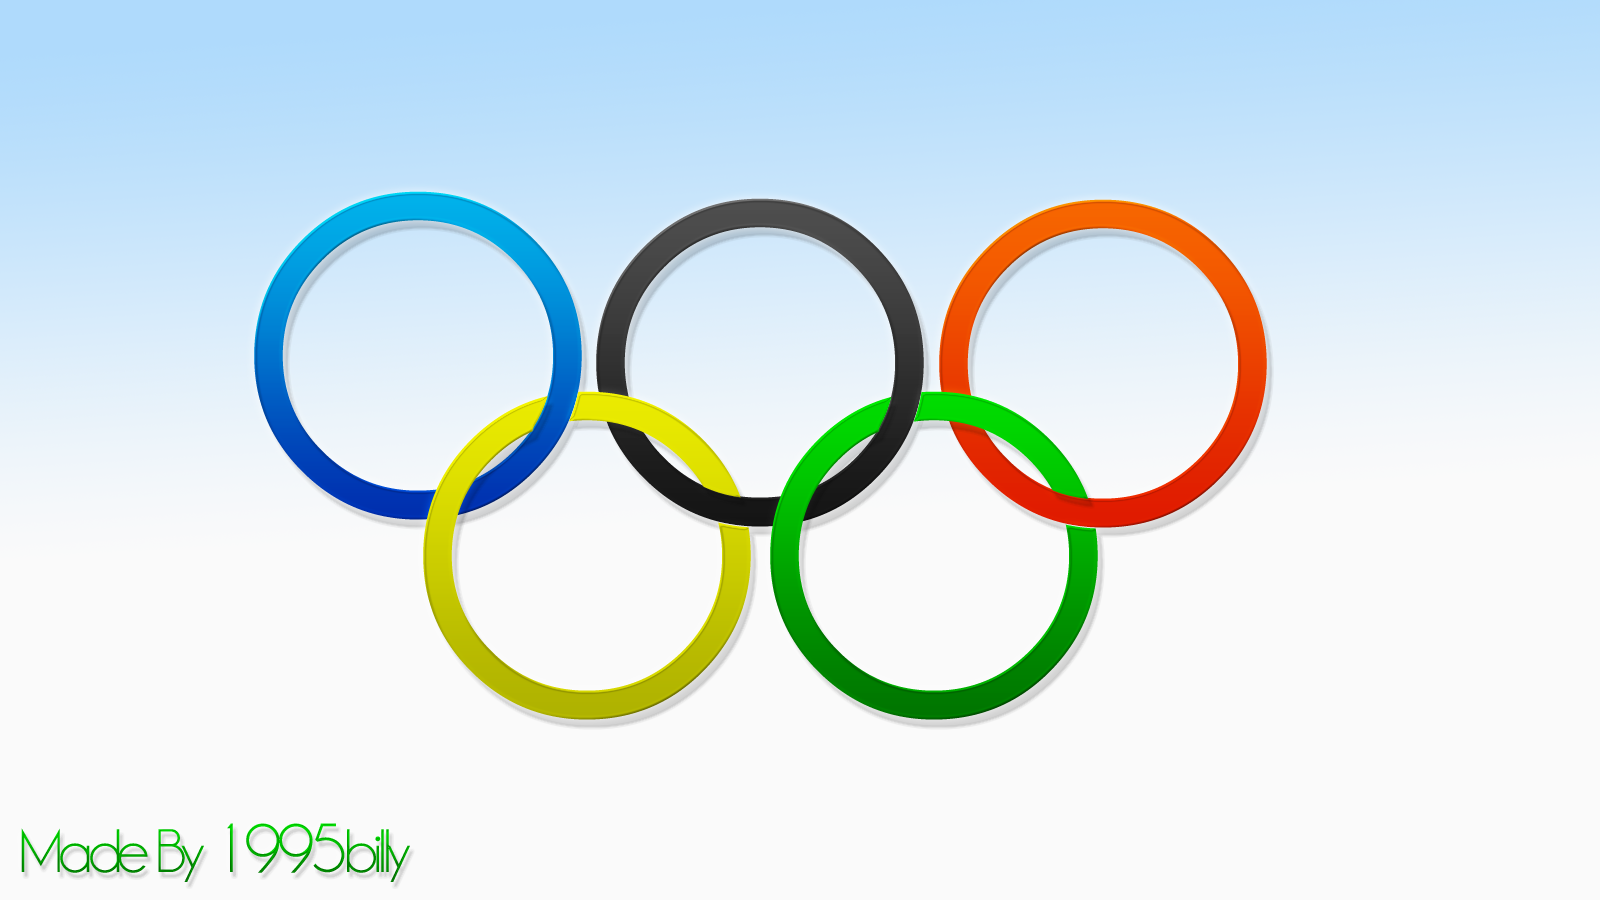 Ahmedabad 2036 Olympic Logo by PaintRubber38 on DeviantArt